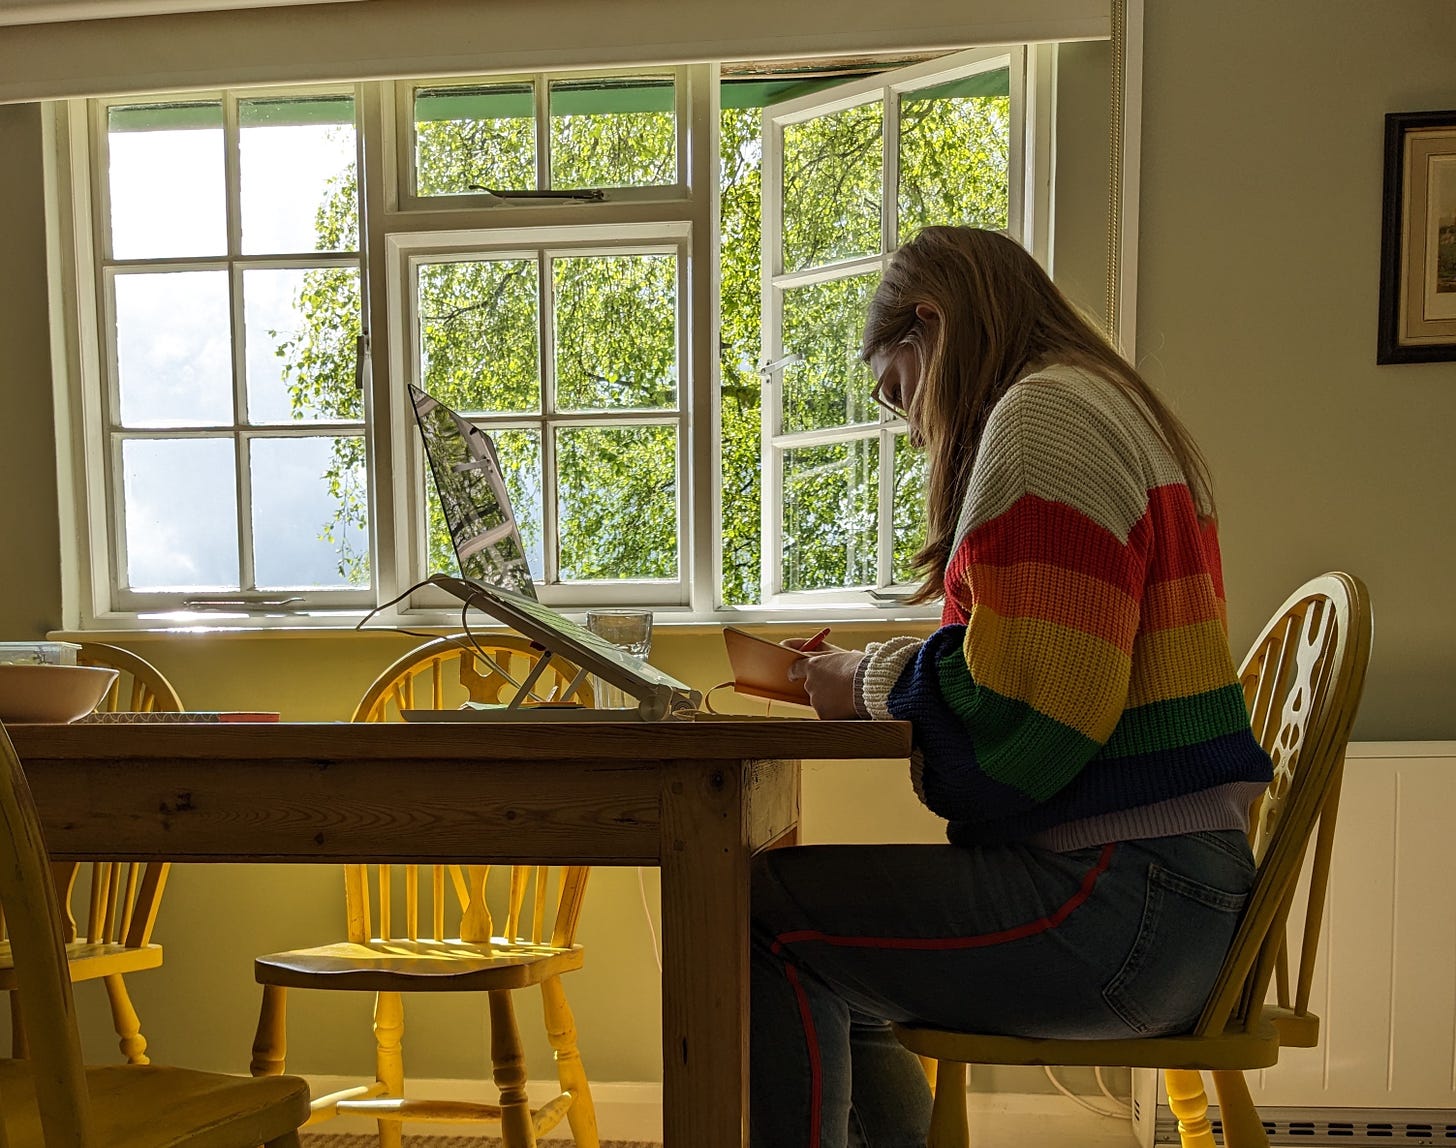 Libby Page sat at a desk writing, with a window behind and a view of trees